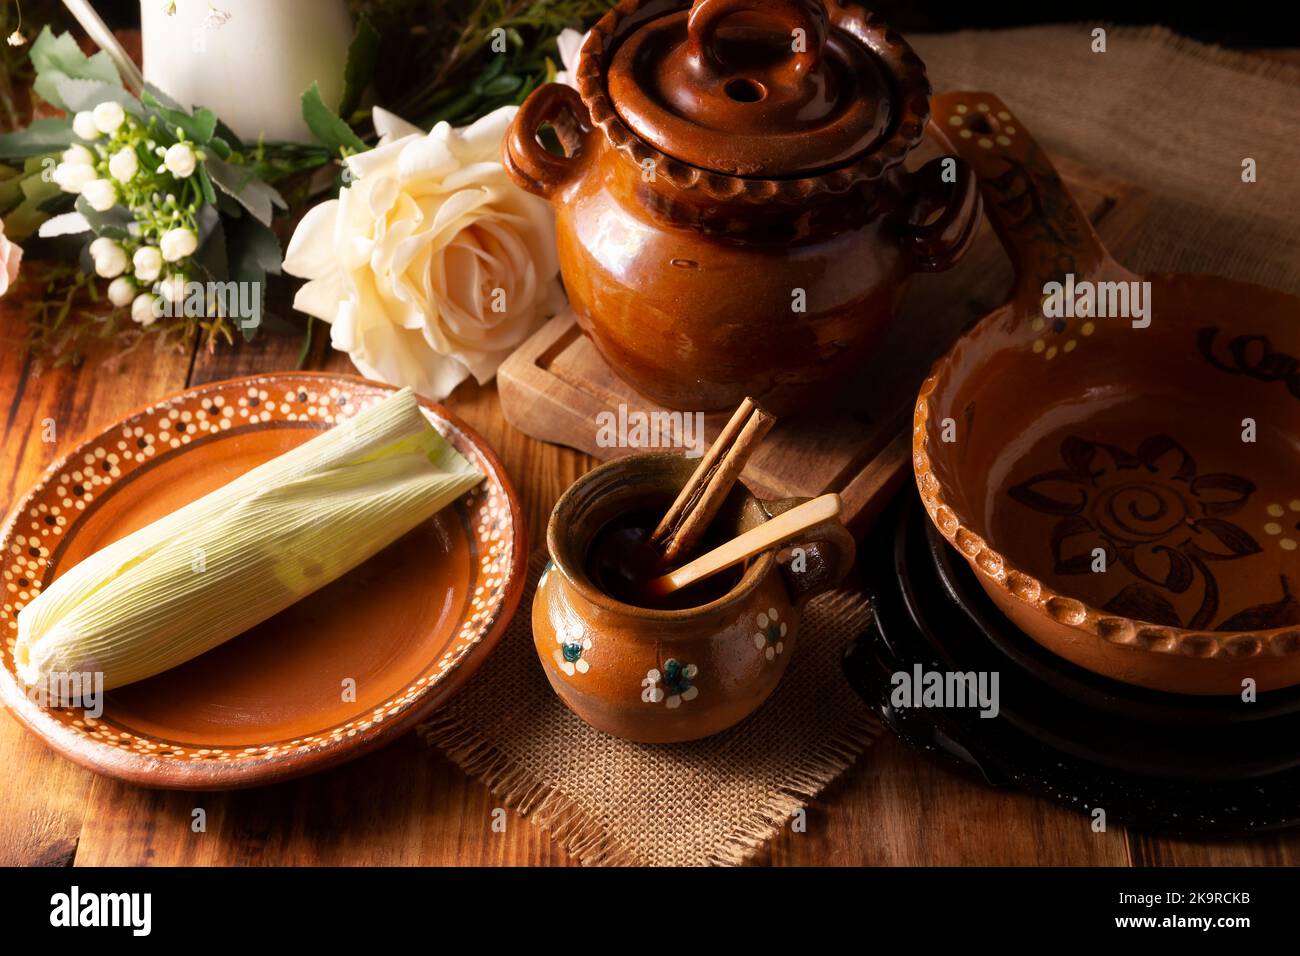 Authentic homemade mexican coffee (cafe de olla) and tamal served in traditional handmade clay mug (Jarrito de barro) on rustic wooden table. Stock Photo